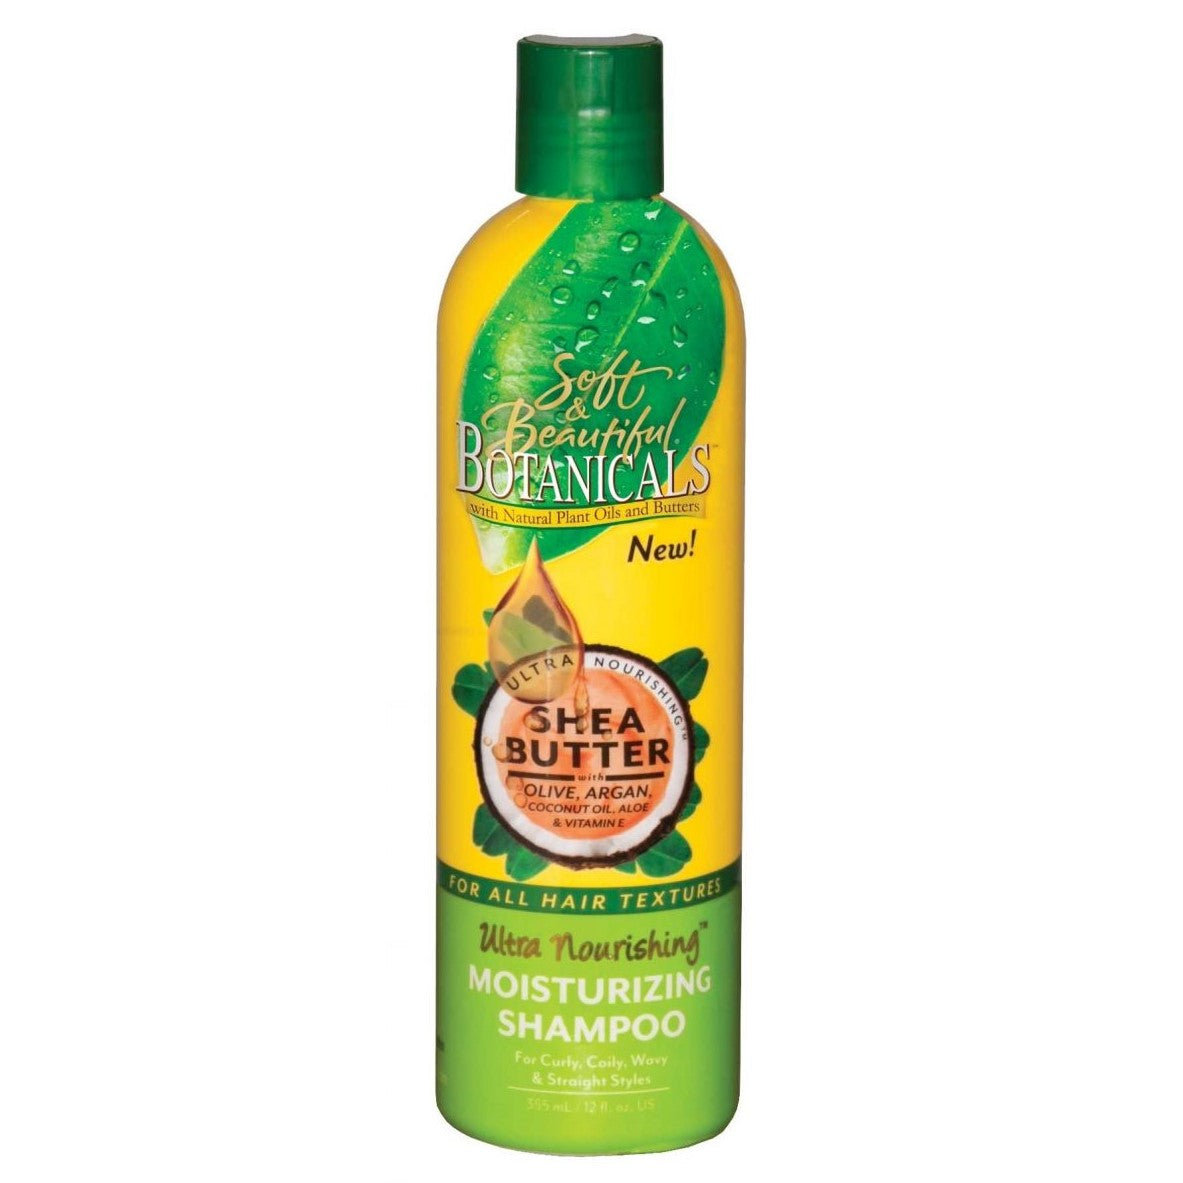 Soft y hermosos botánicos Butter Butter Neutralizing Shampoo 355ml